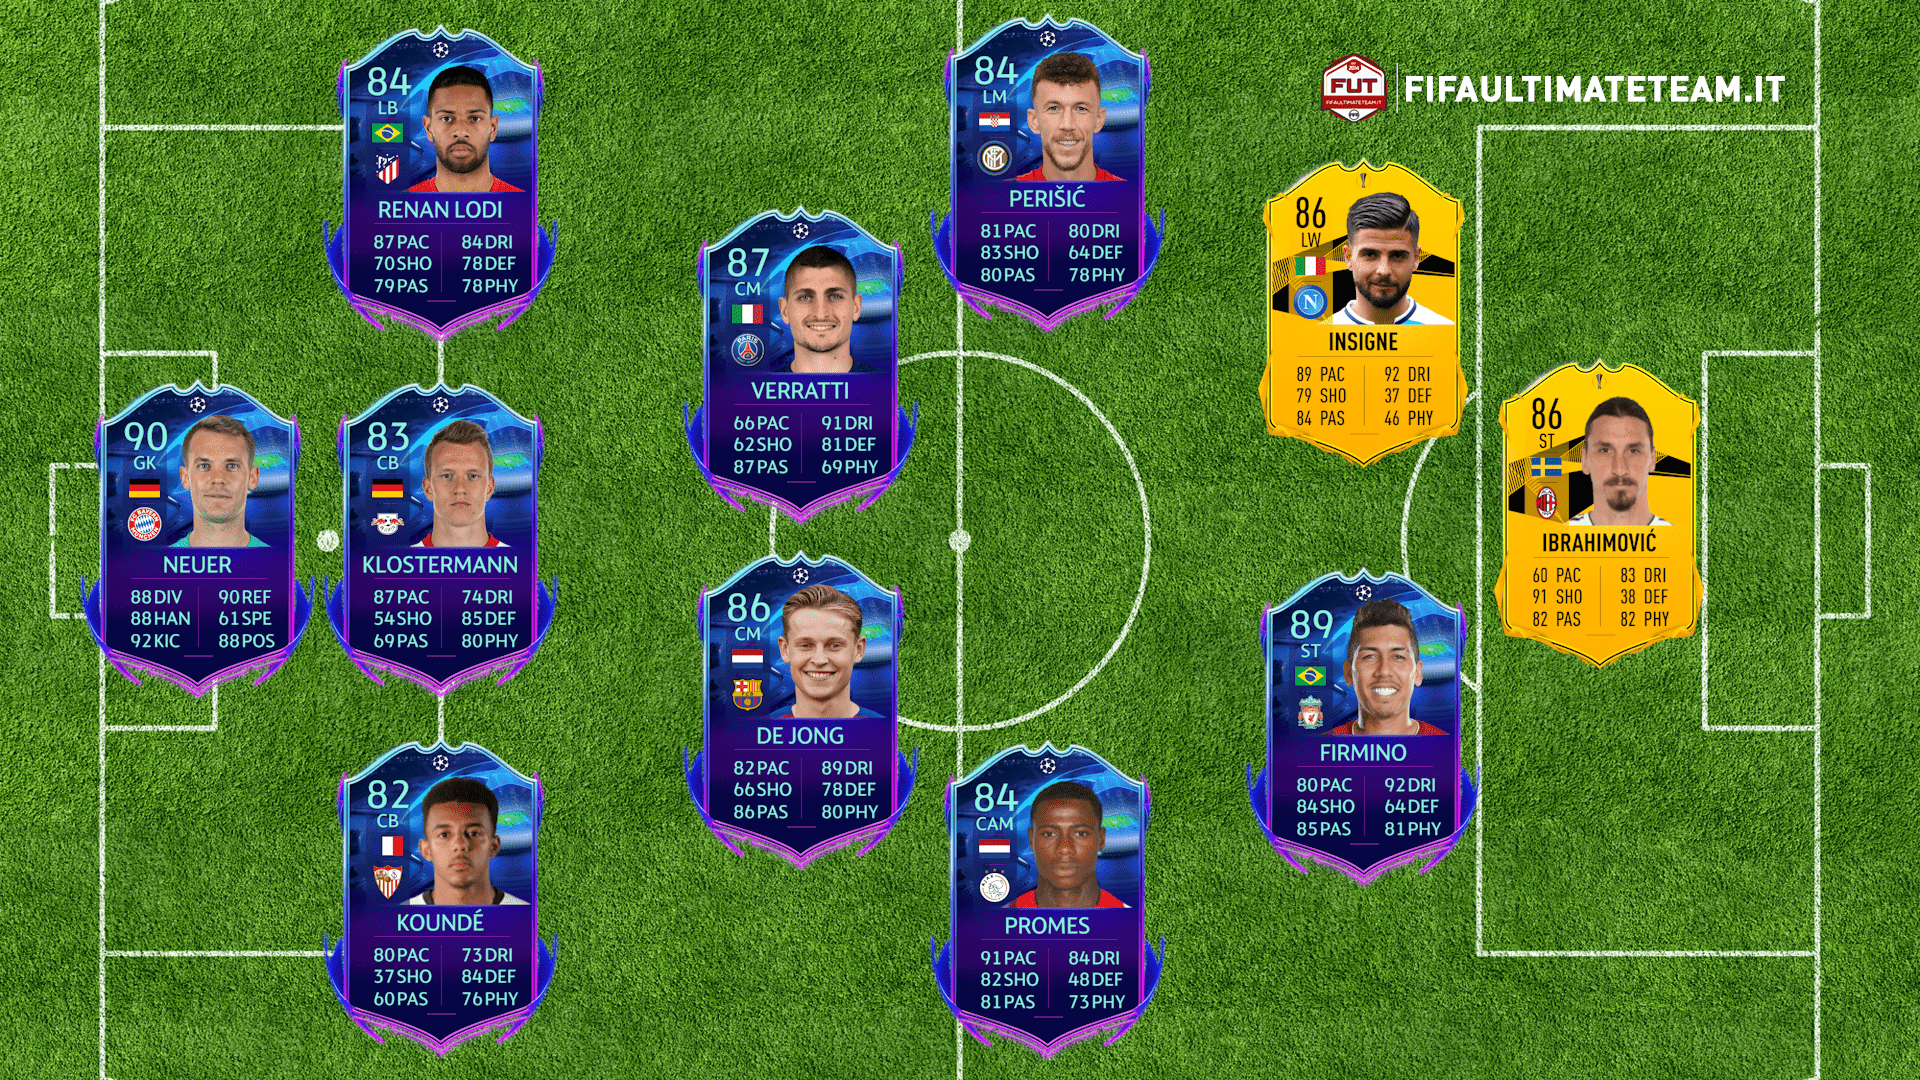 Fifa 21 Rttf Predictions Road To The Final Fifaultimateteam It Uk